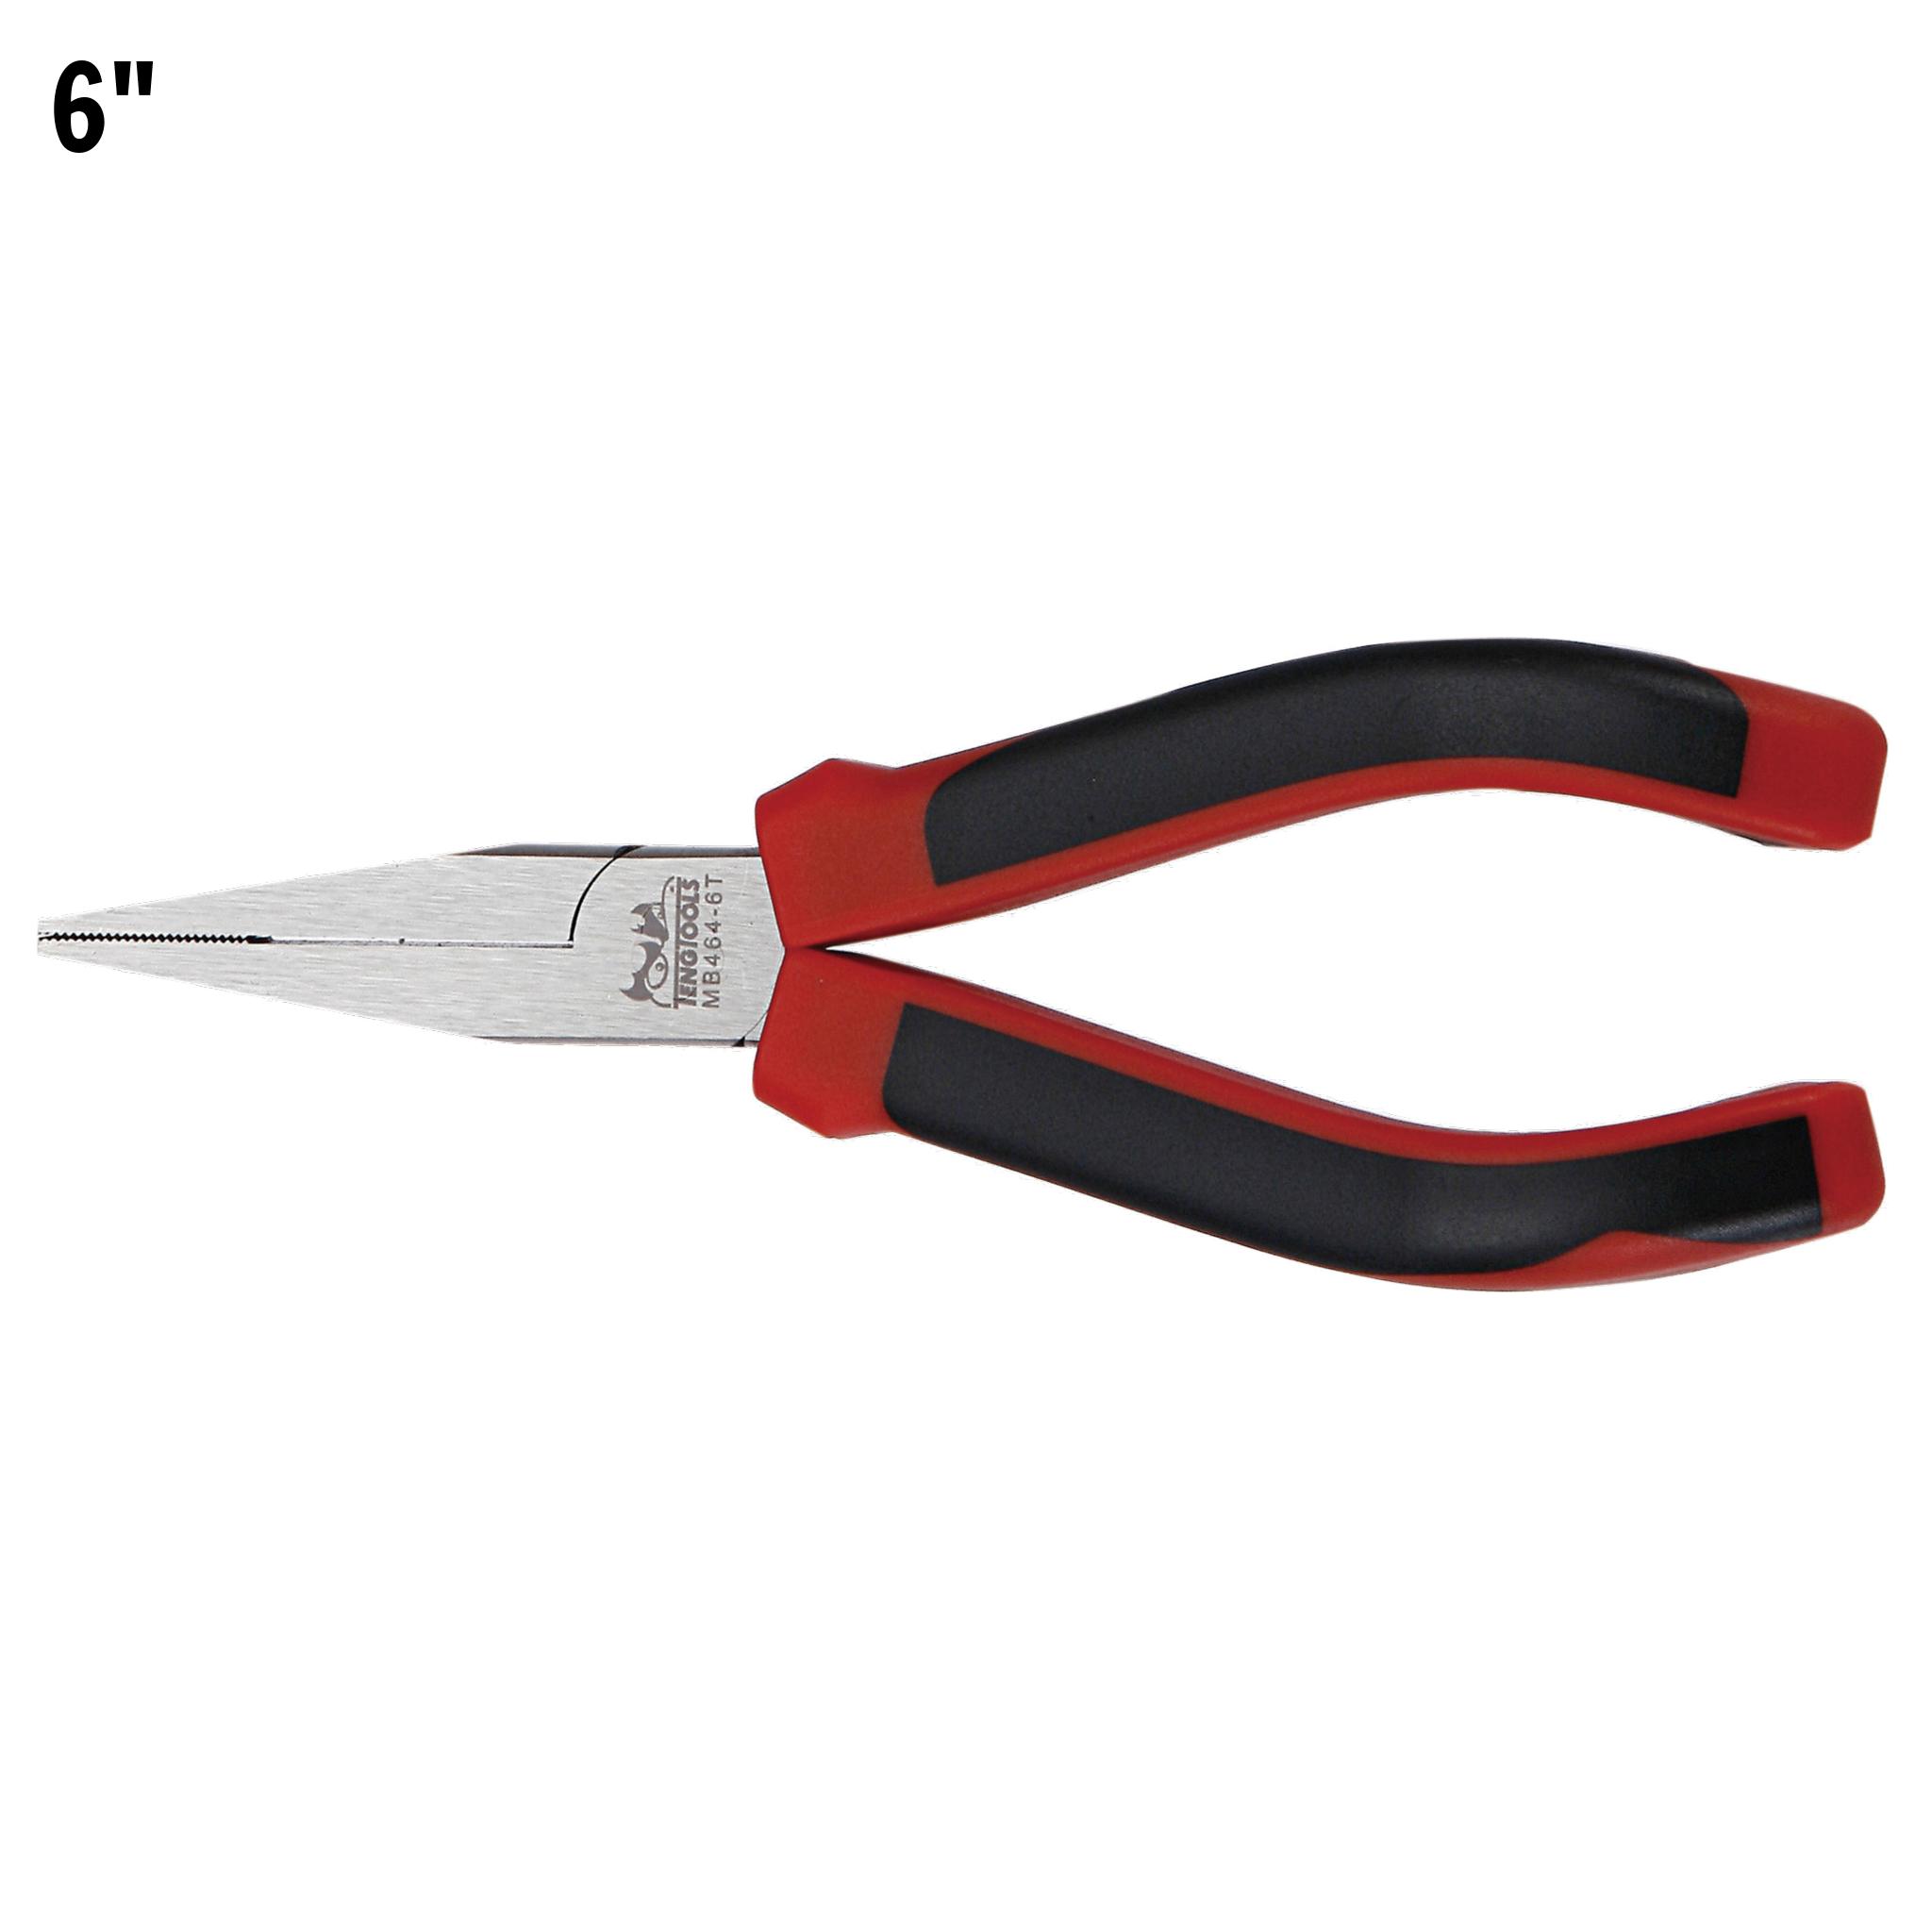 Teng Tools 6 Inch Long, Straight Jaws TPR Grip Flat Nose Pliers - MB464-6T